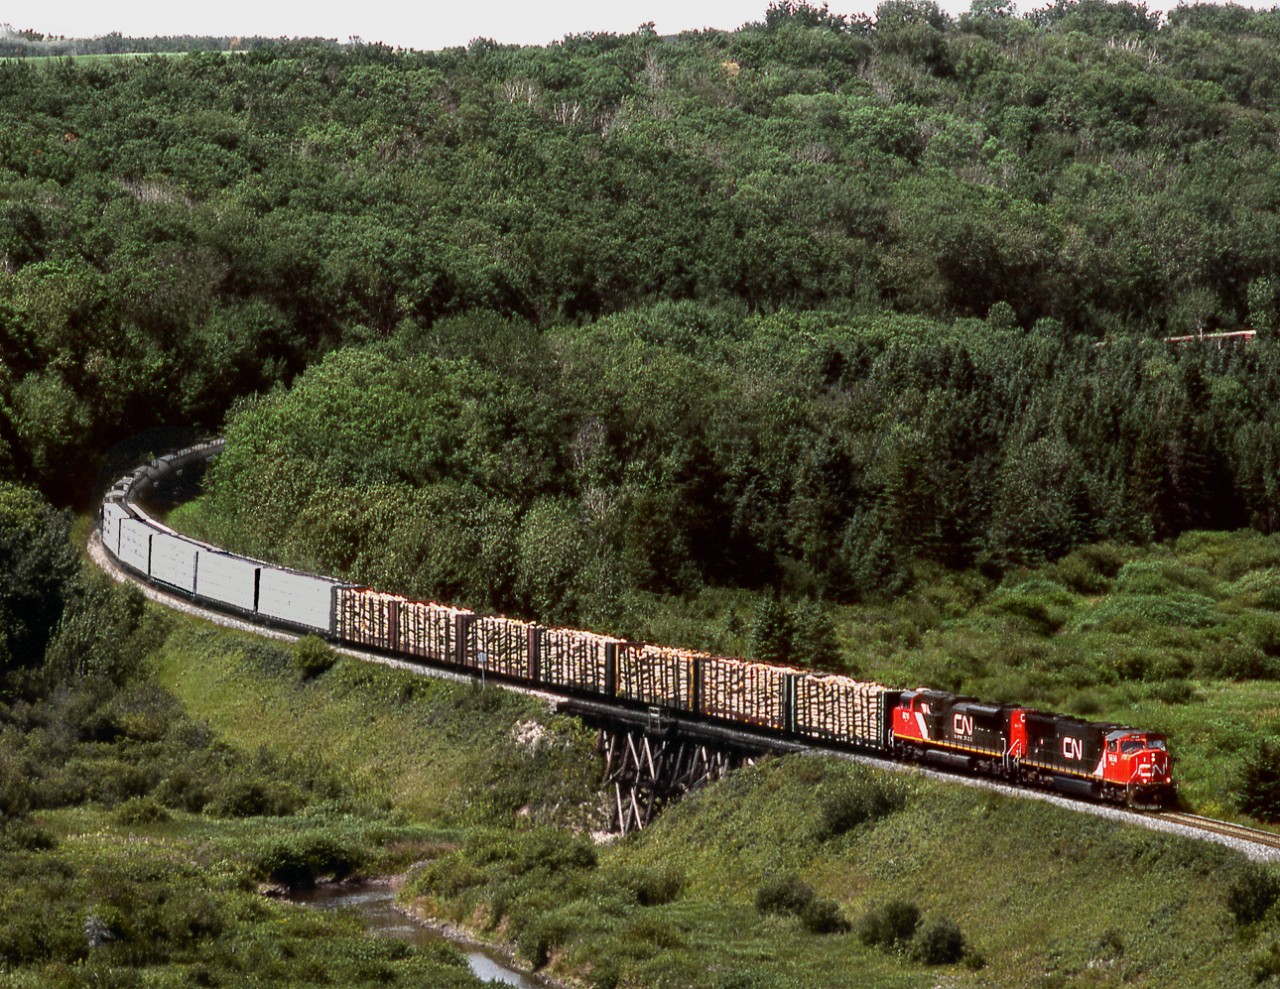 Eastbound train 452 on CN's Prairie North Line has just crossed from Saskatchewan to Manitoba and crosses Boggy Creek, a tributary of The Assiniboine River